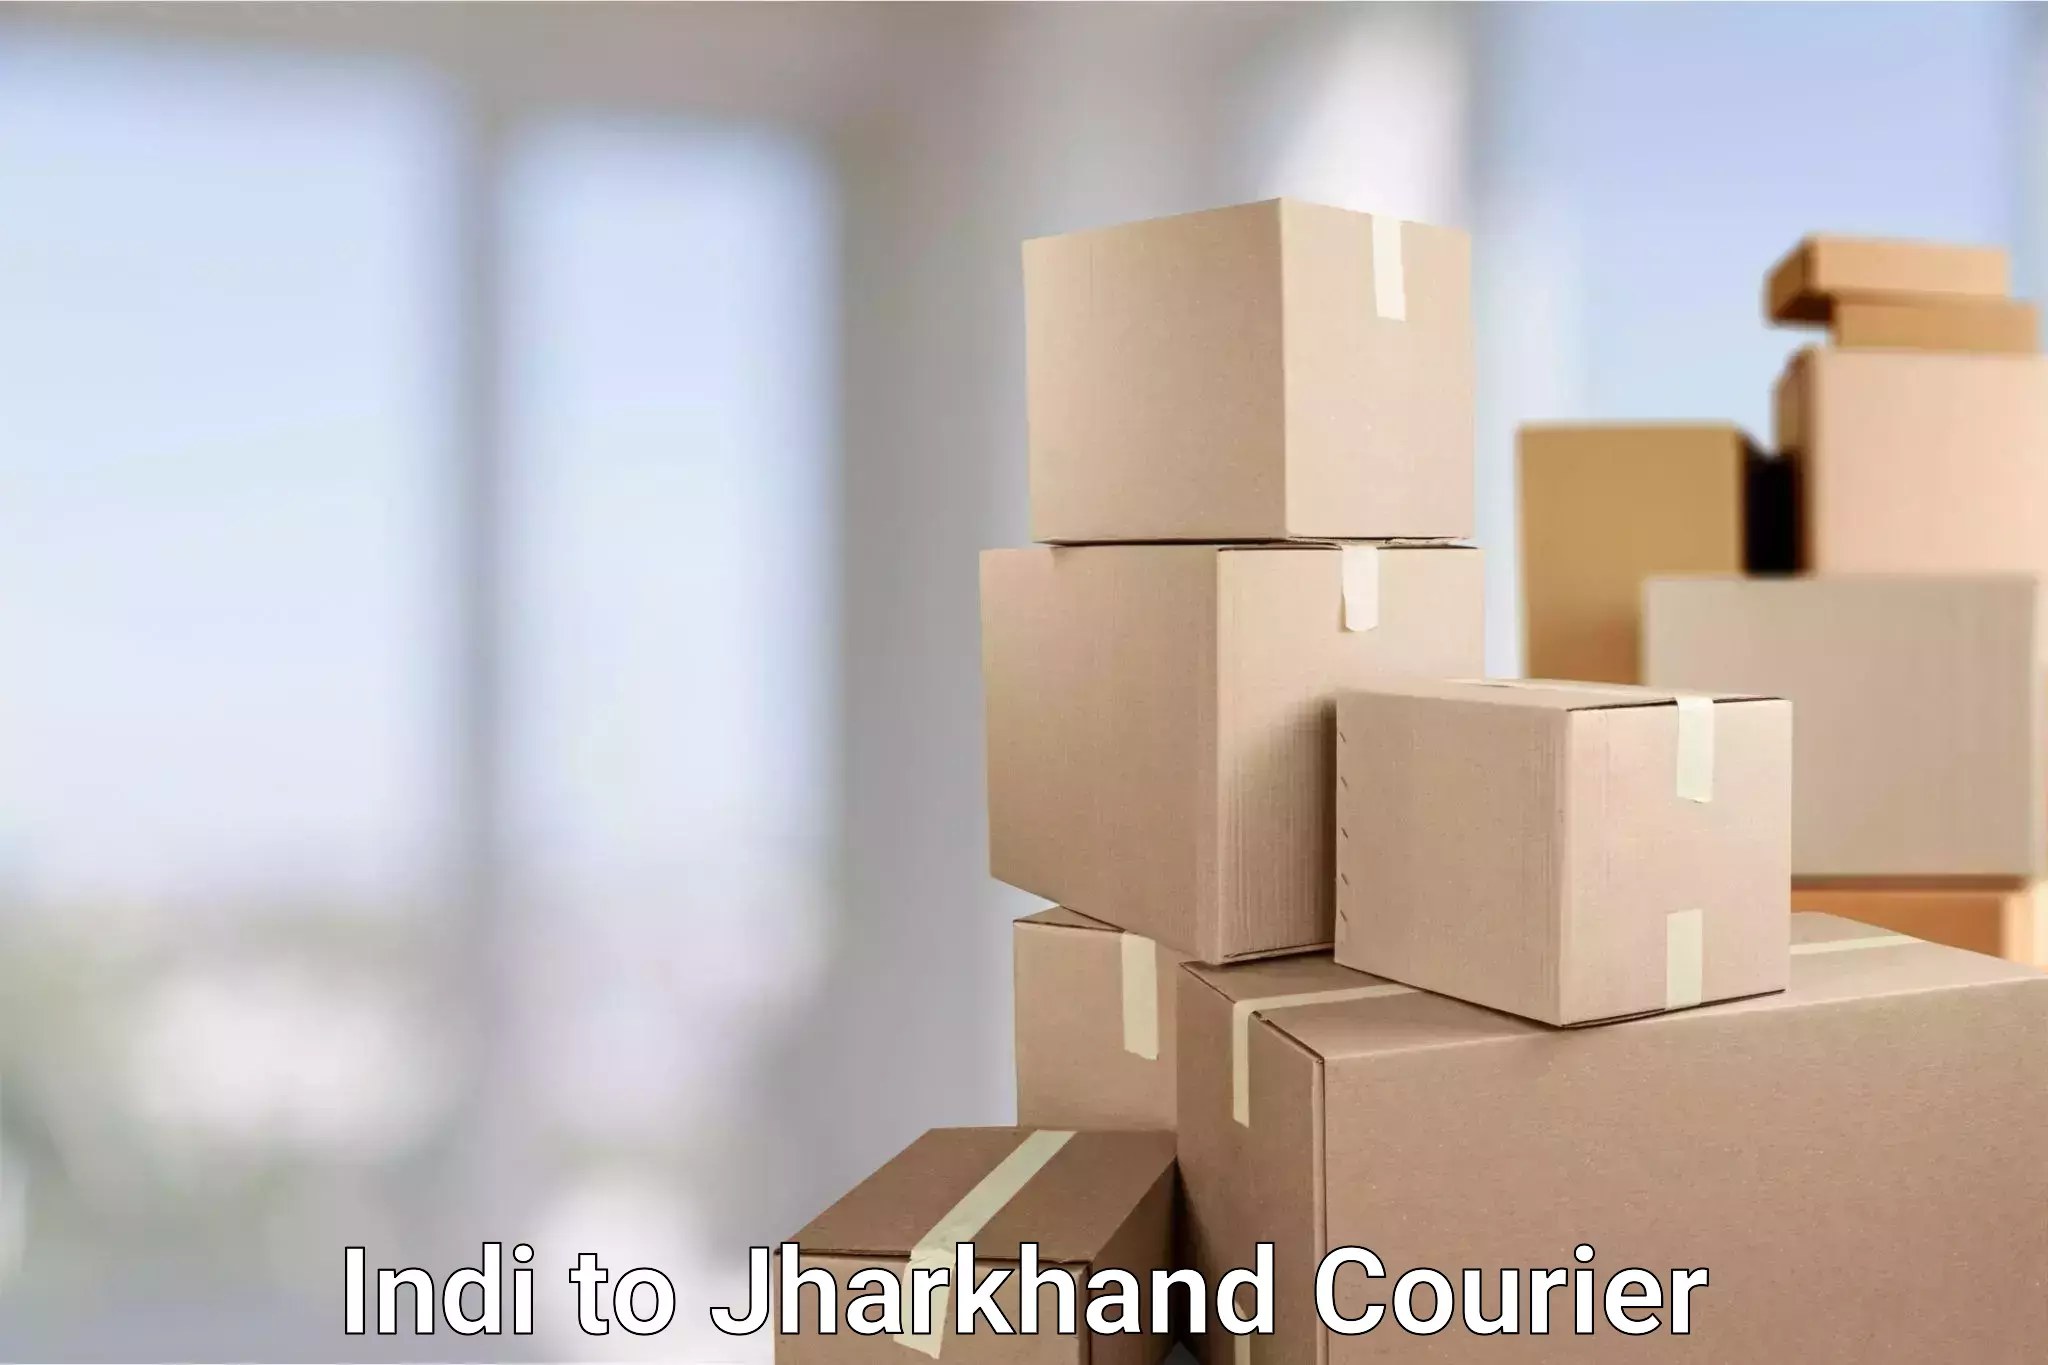 24-hour courier service Indi to Bokaro Steel City